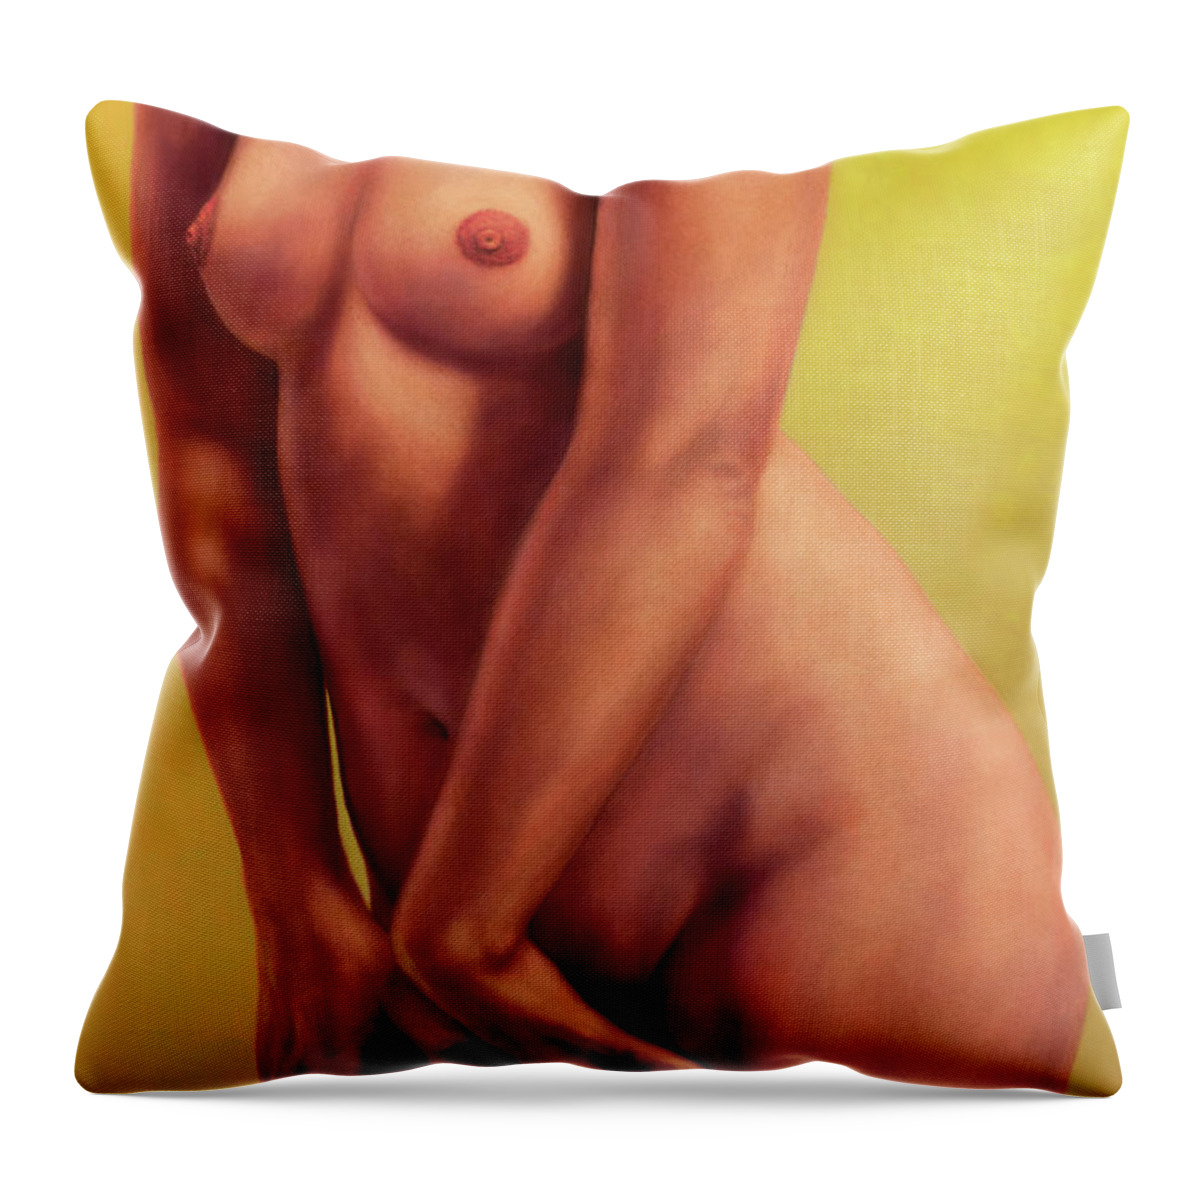 Female Throw Pillow featuring the painting Standing Figure with Yellow Nails by James W Johnson